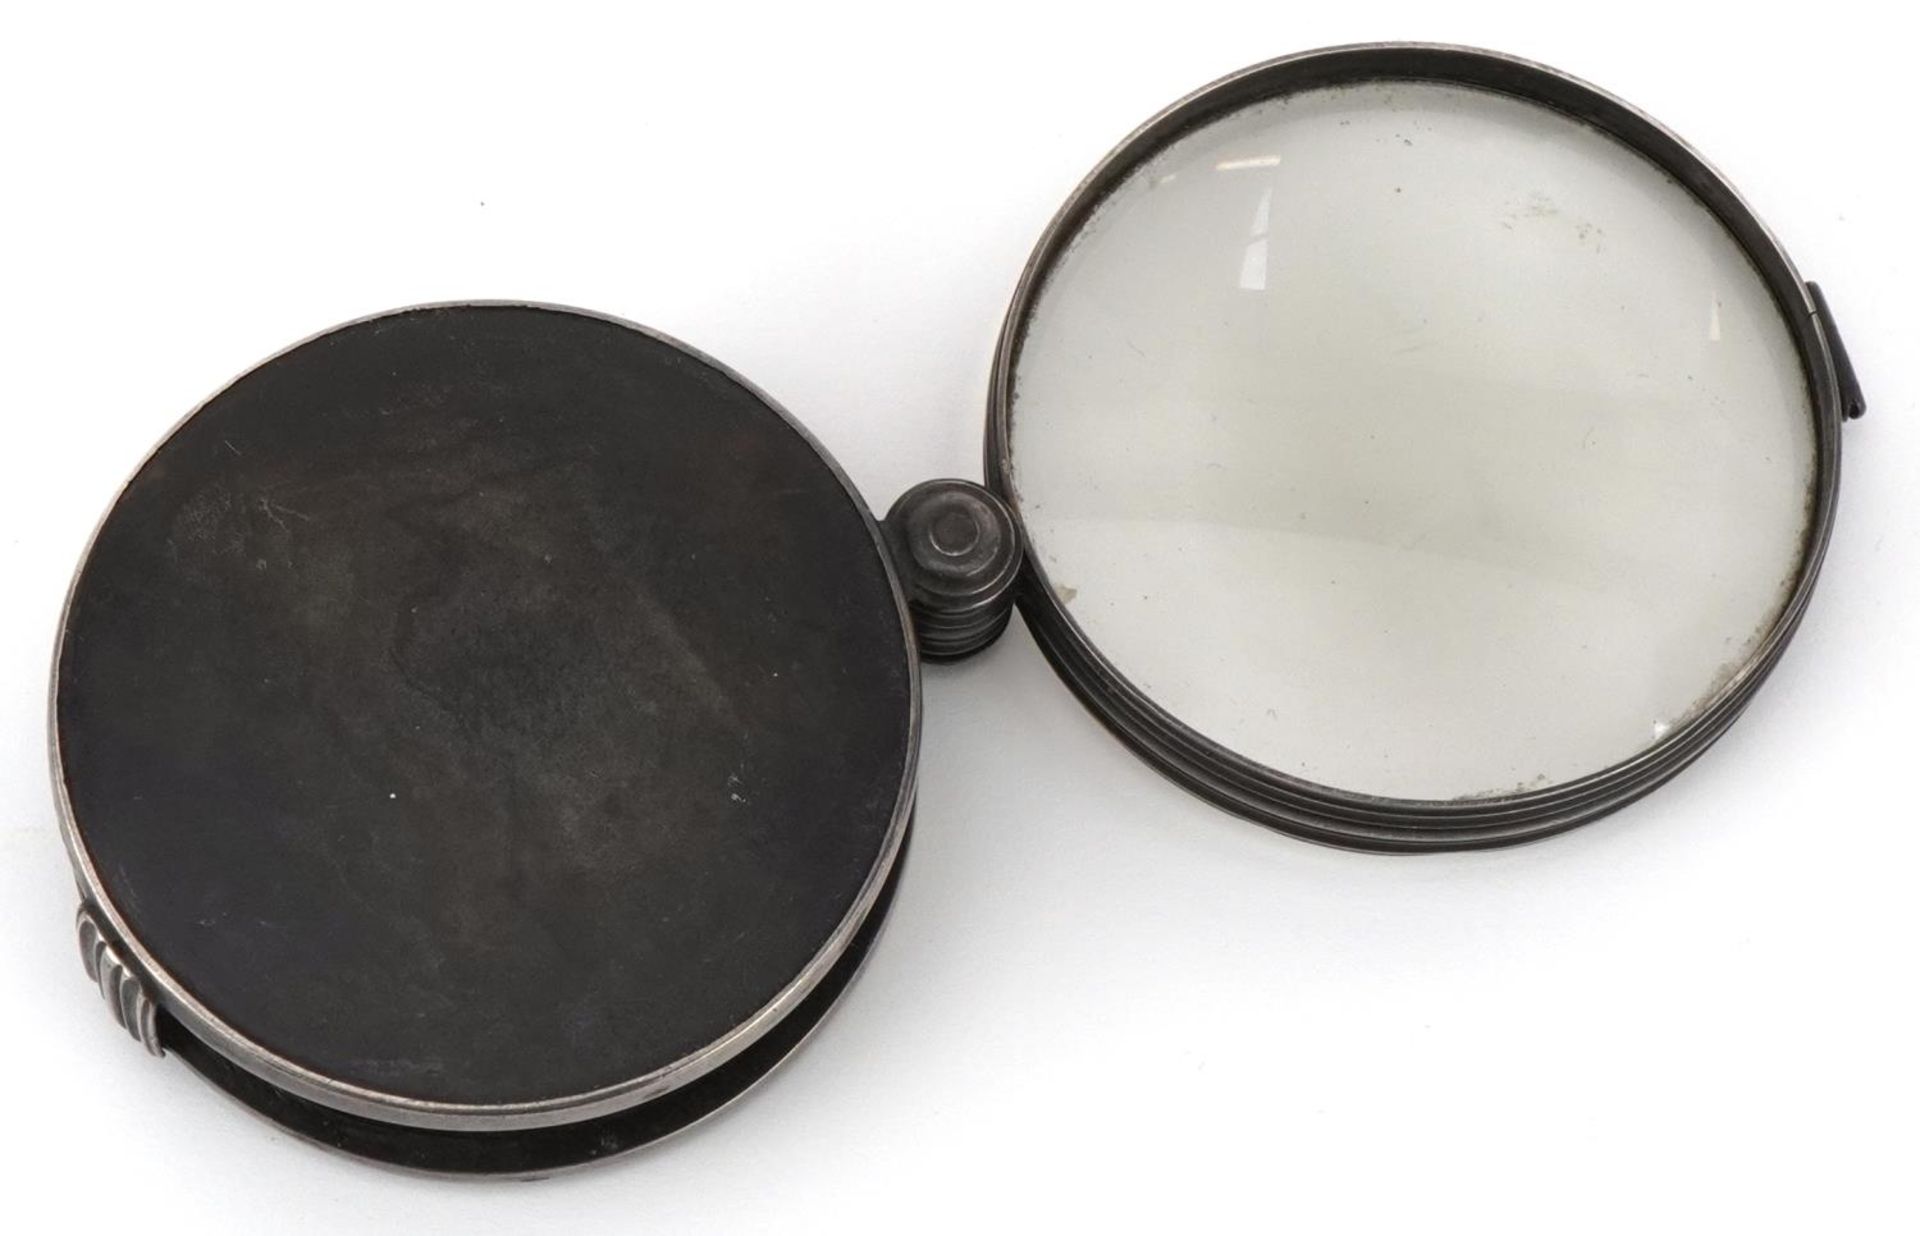 19th century unmarked silver and tortoiseshell folding magnifying glass, 6.5cm in diameter when